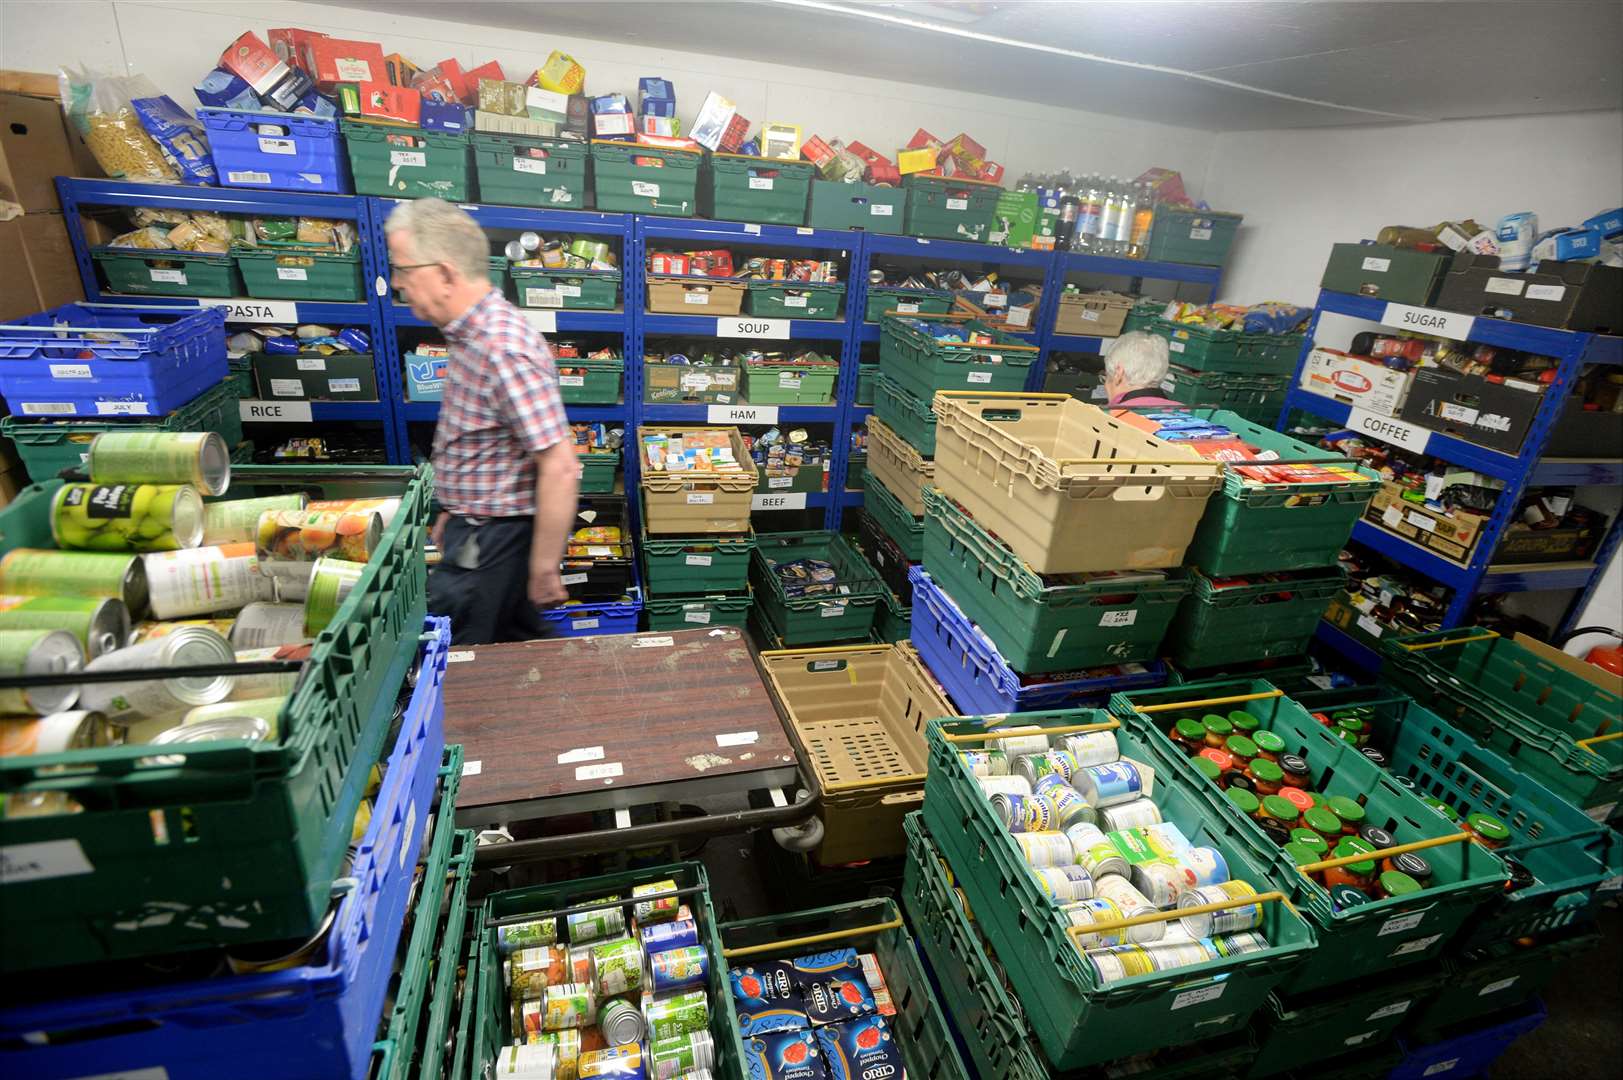 Blythswood's Highland Foodbank is asking people to donate using its 'reverse Advent calendar' available at www.blythswood.org